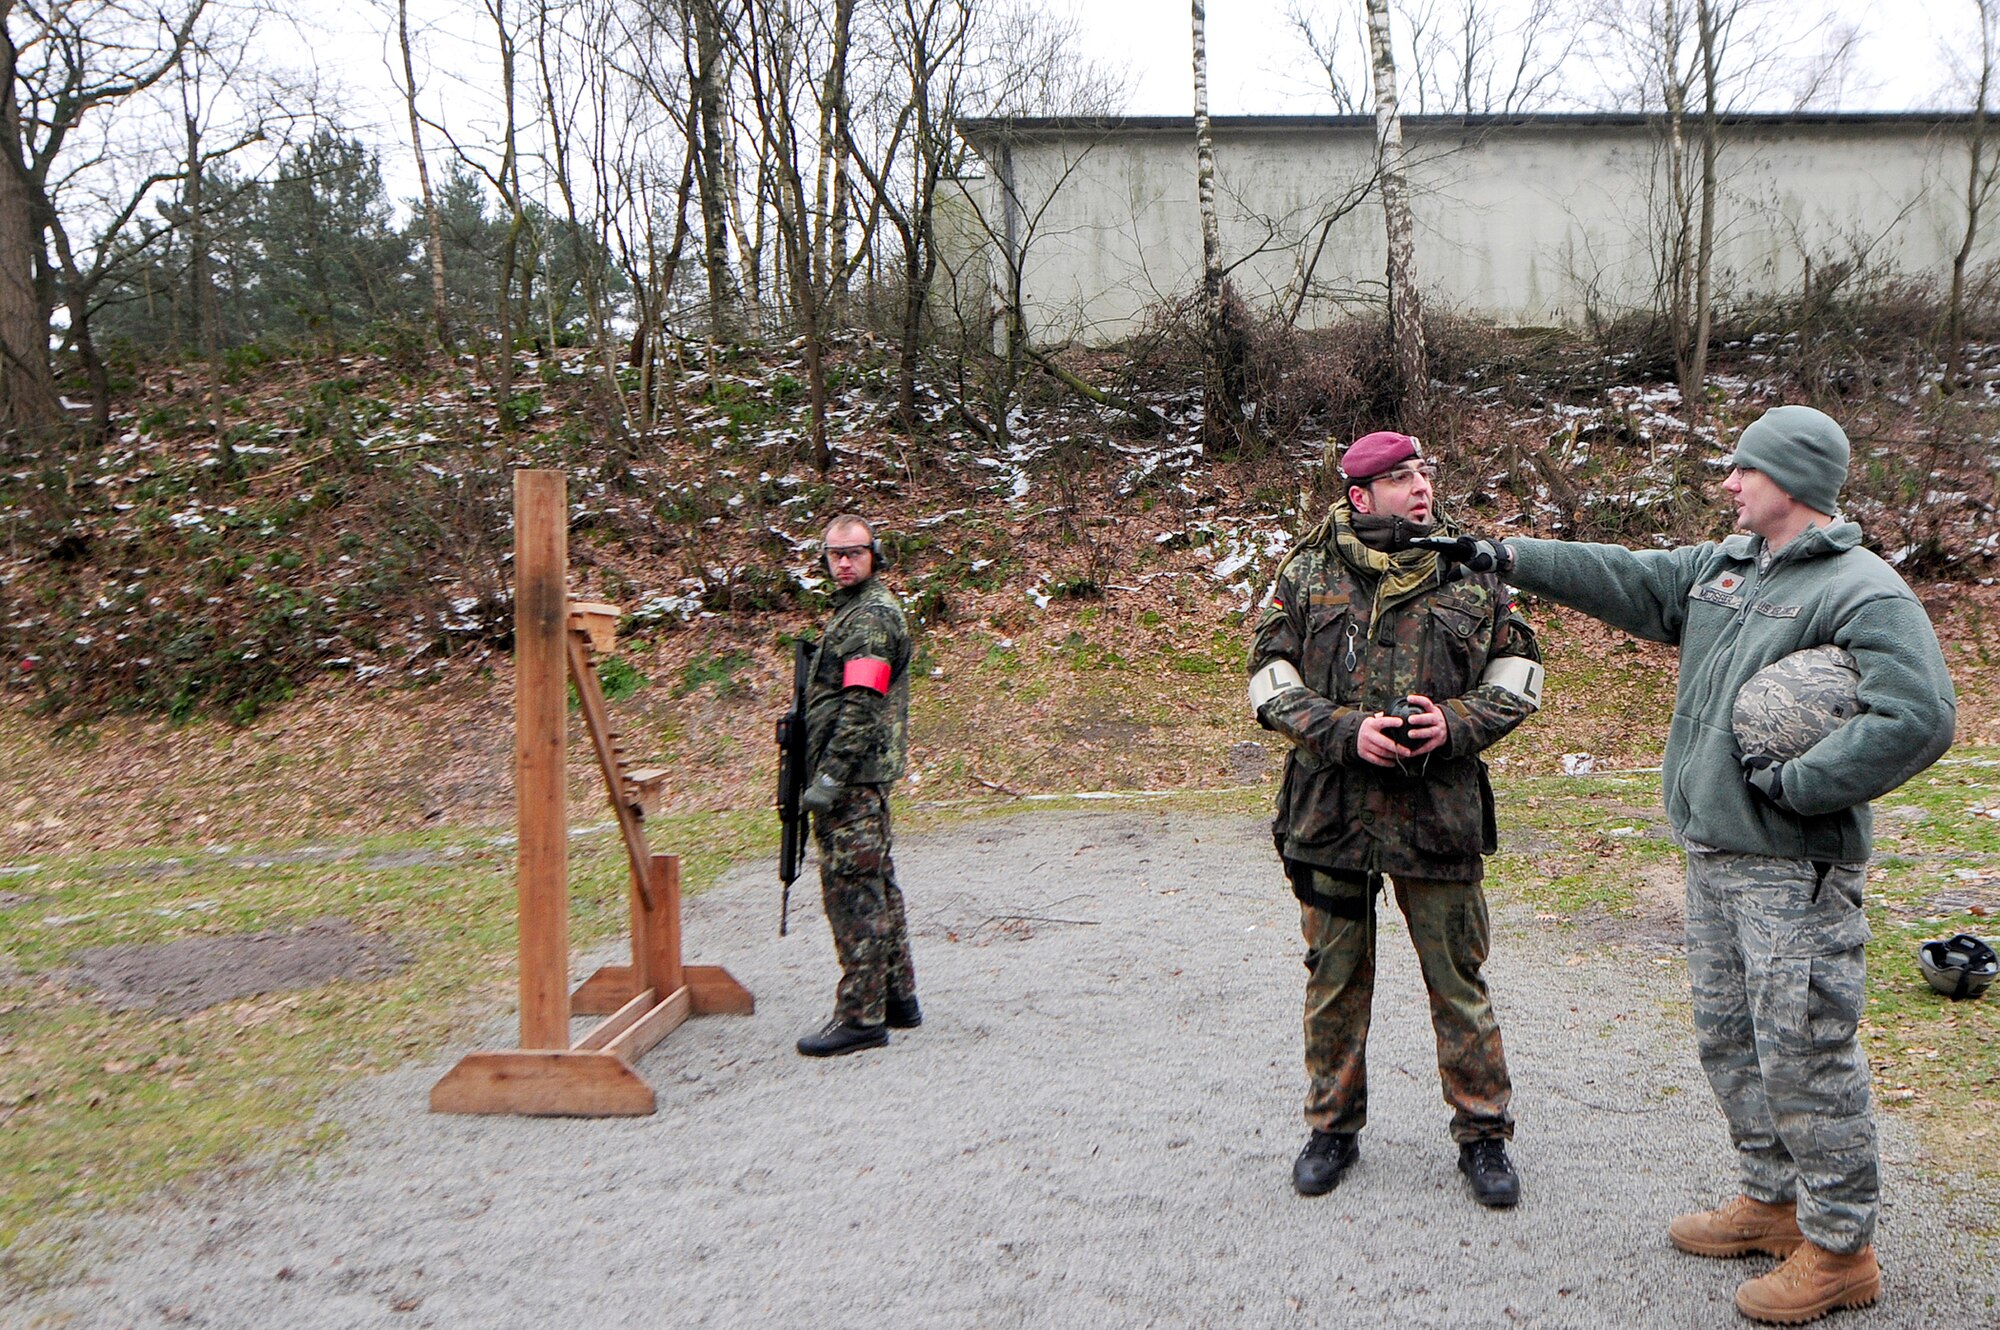 Maj. Jason Medsger receives weapon familiarization training by personnel from the 31st German Airborne Brigade Feb. 18, 2011, in Oldenburg, Germany. Members from the 435th Contingency Response Group attended the German shooting competition, "Schutzenschnur," where they trained and earned a German Shooting Proficiency Badge. Major Medsger is the 435th Security Forces Squadron commander. (U.S. Air Force photo/Airman 1st Class Brea Miller)